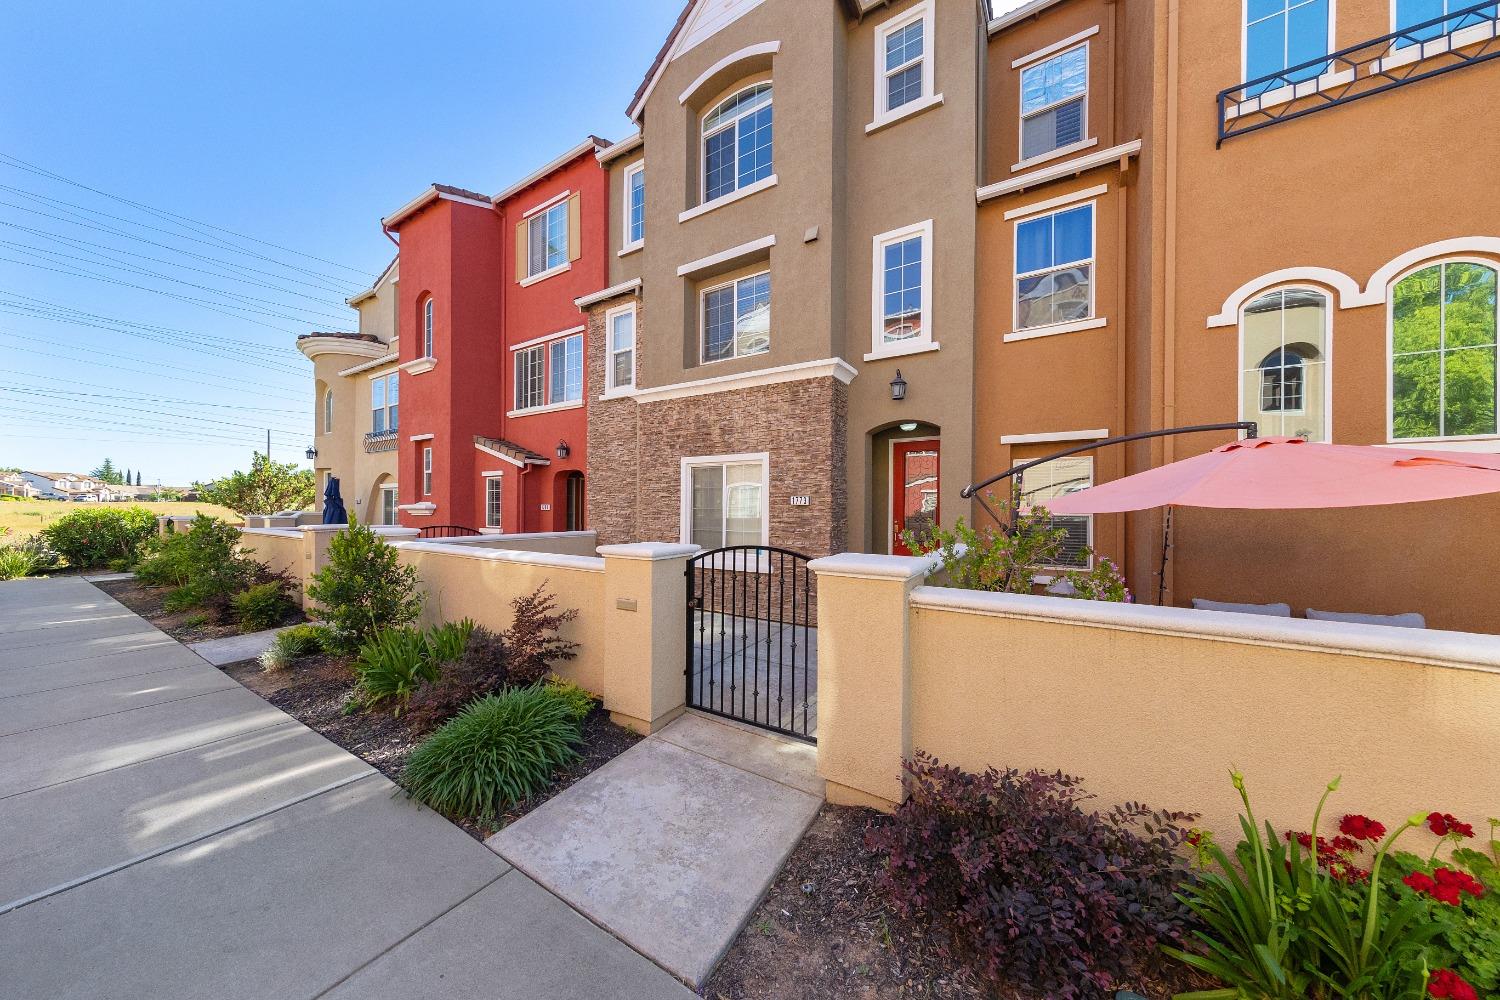 View Roseville, CA 95747 townhome